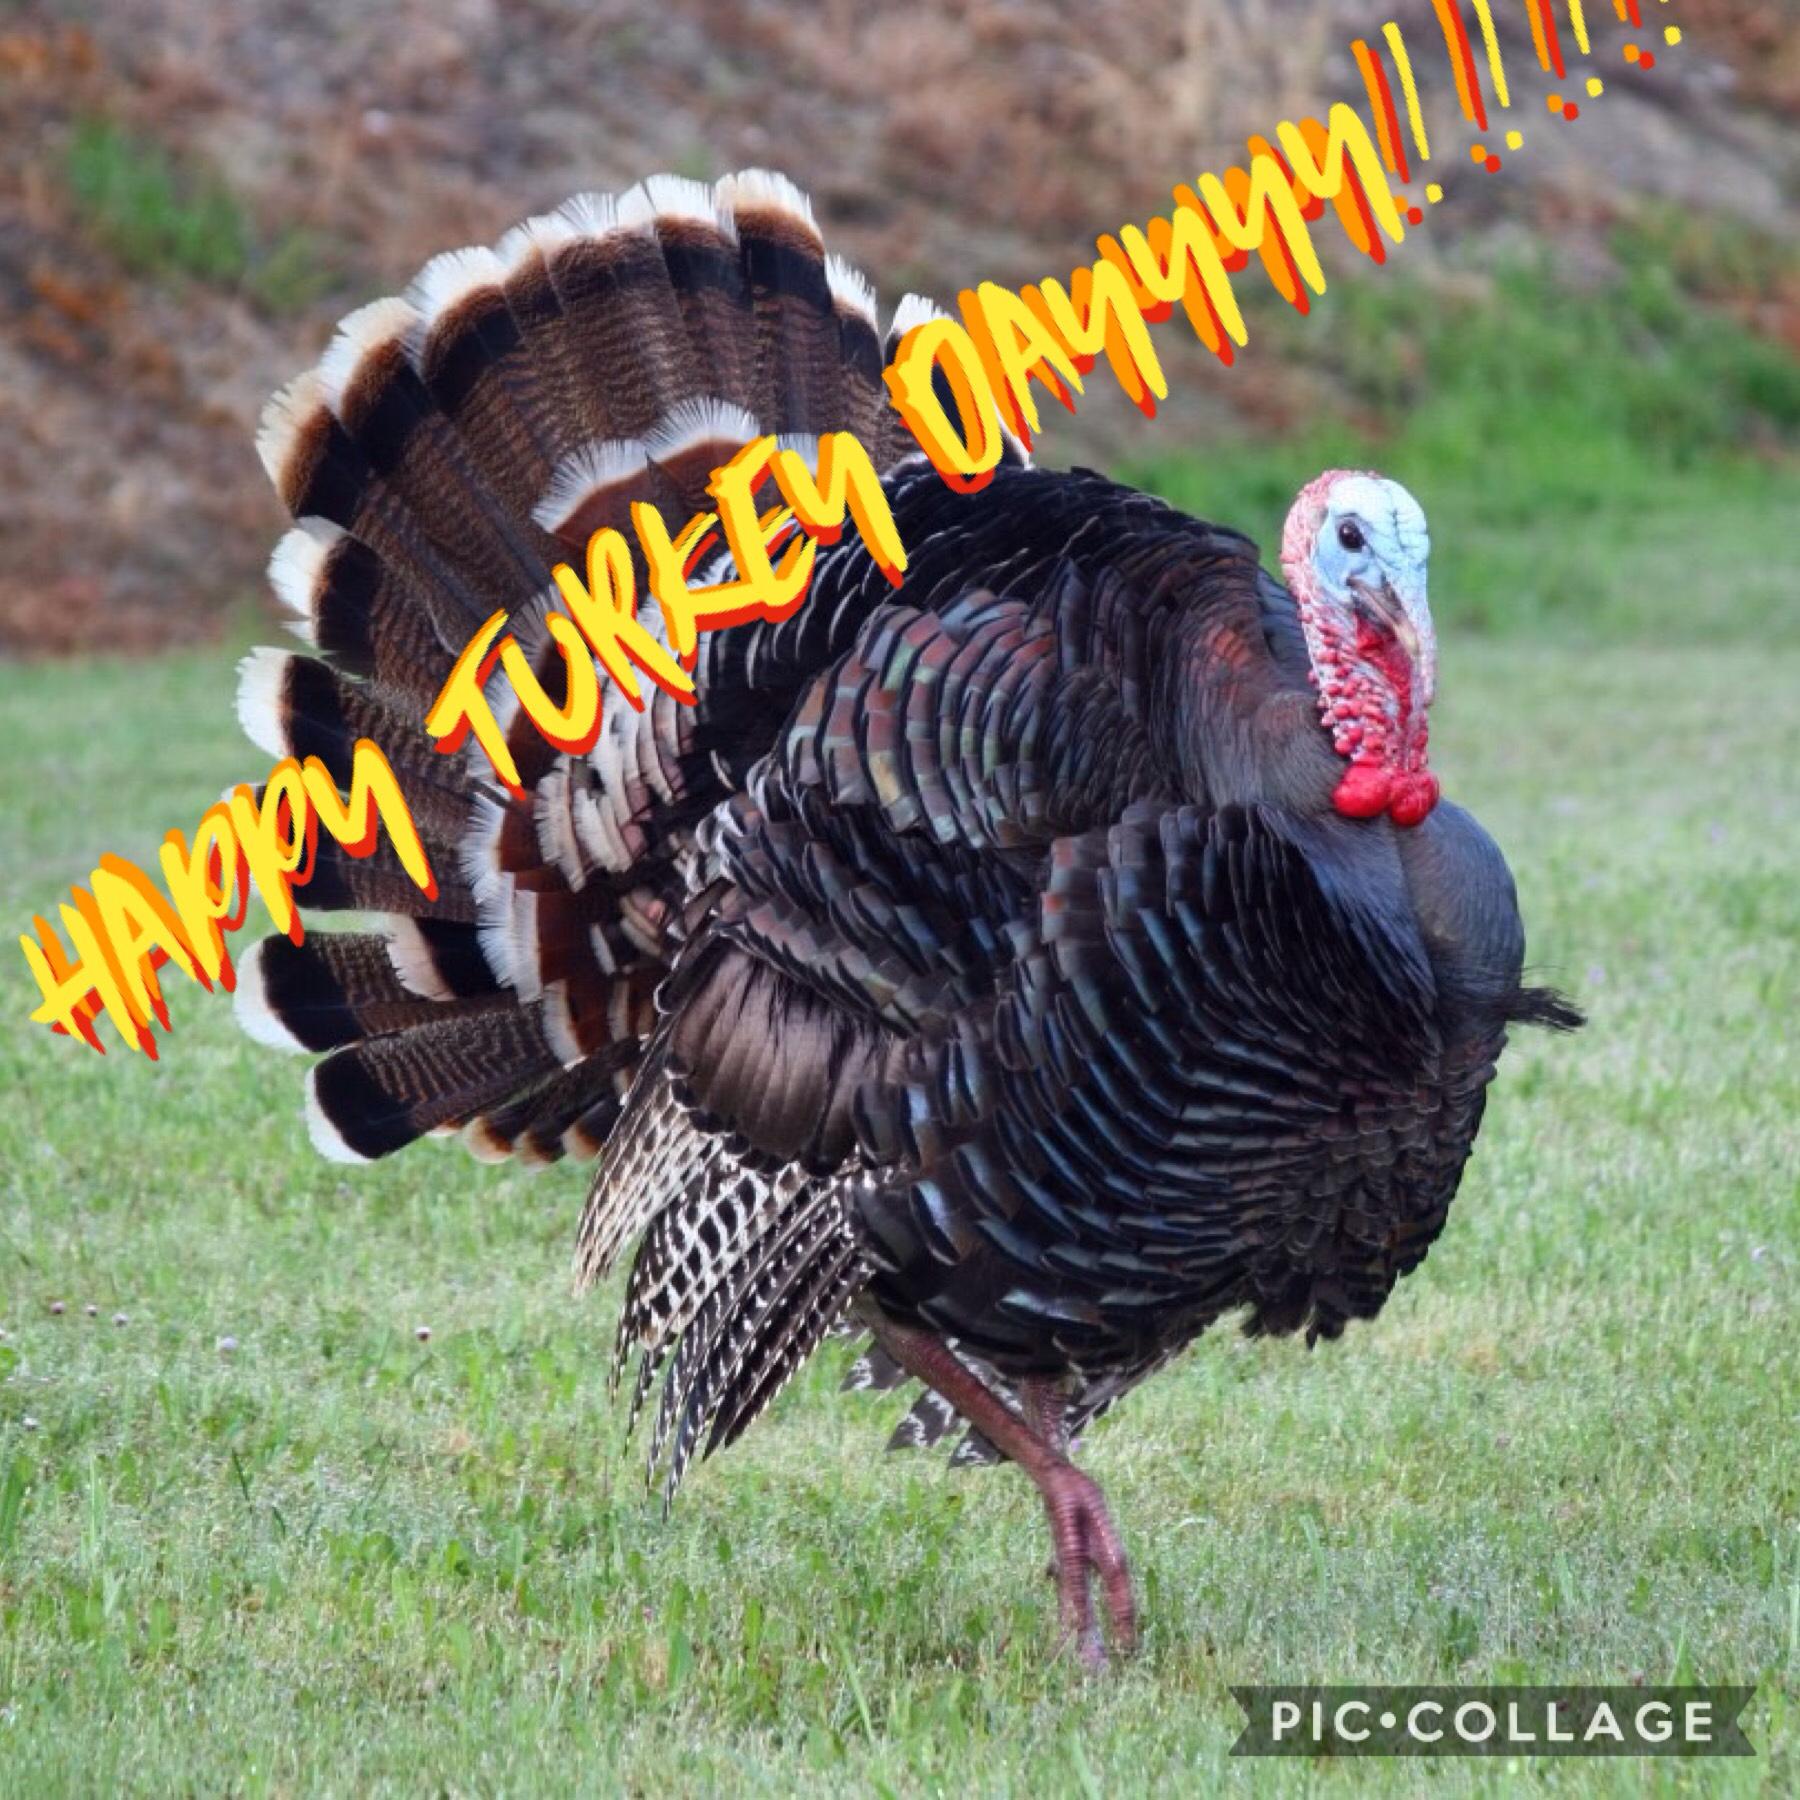 TURKEY DAY IS THE ONE DAY WHERE I CAN GO INTO A FOOD COMA!!!!! YEAH!!!!! BOIIIIII